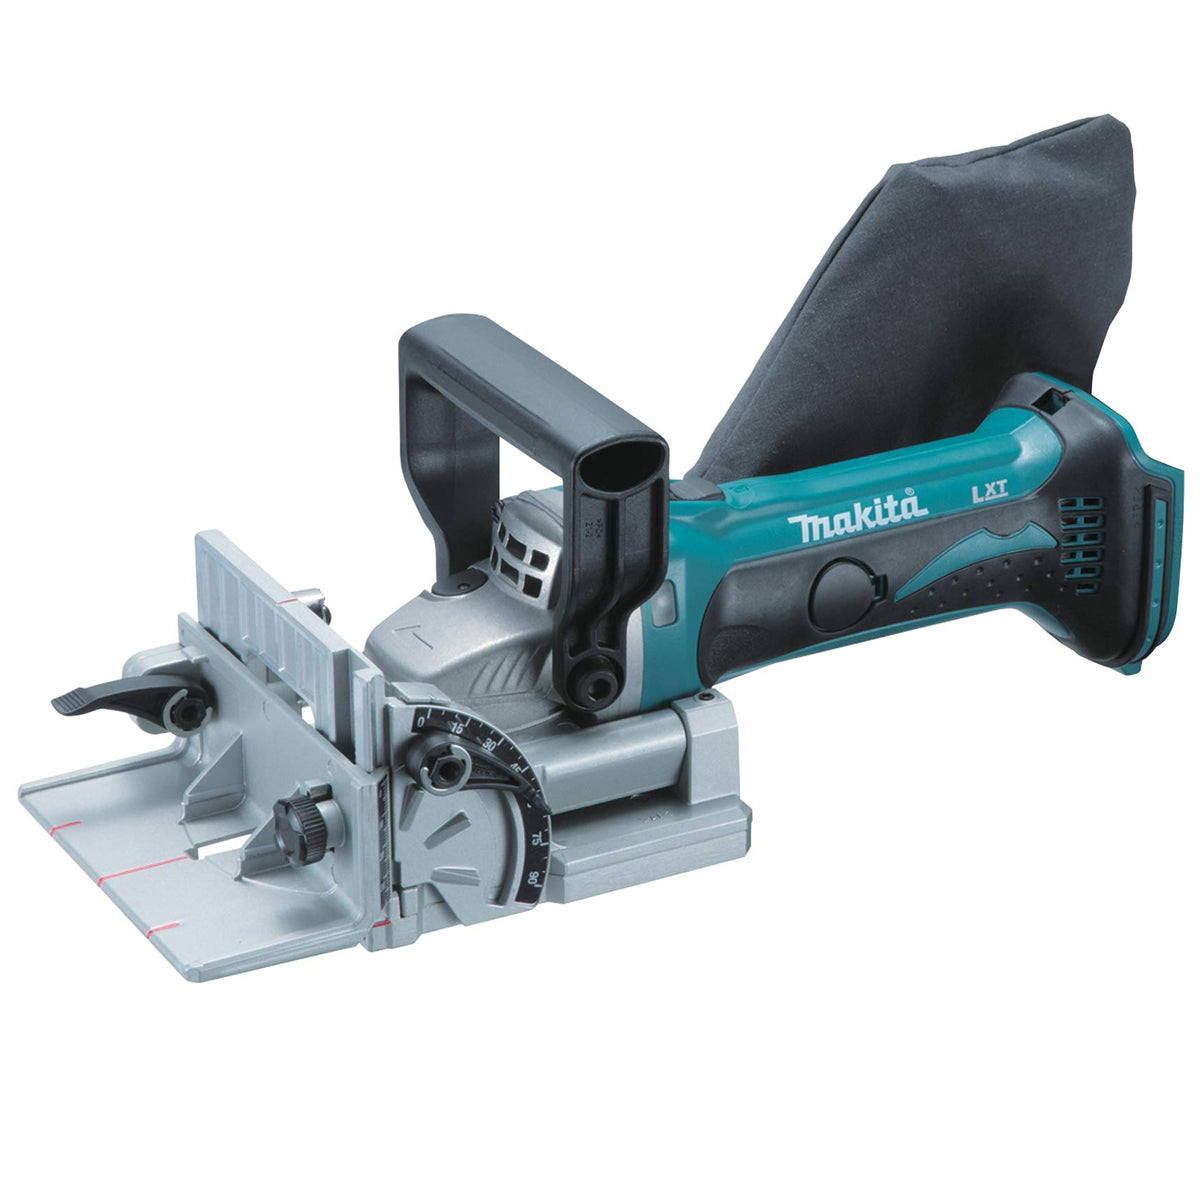 Makita DPJ180Z 18v LXT Li-ion Biscuit Jointer Body Only